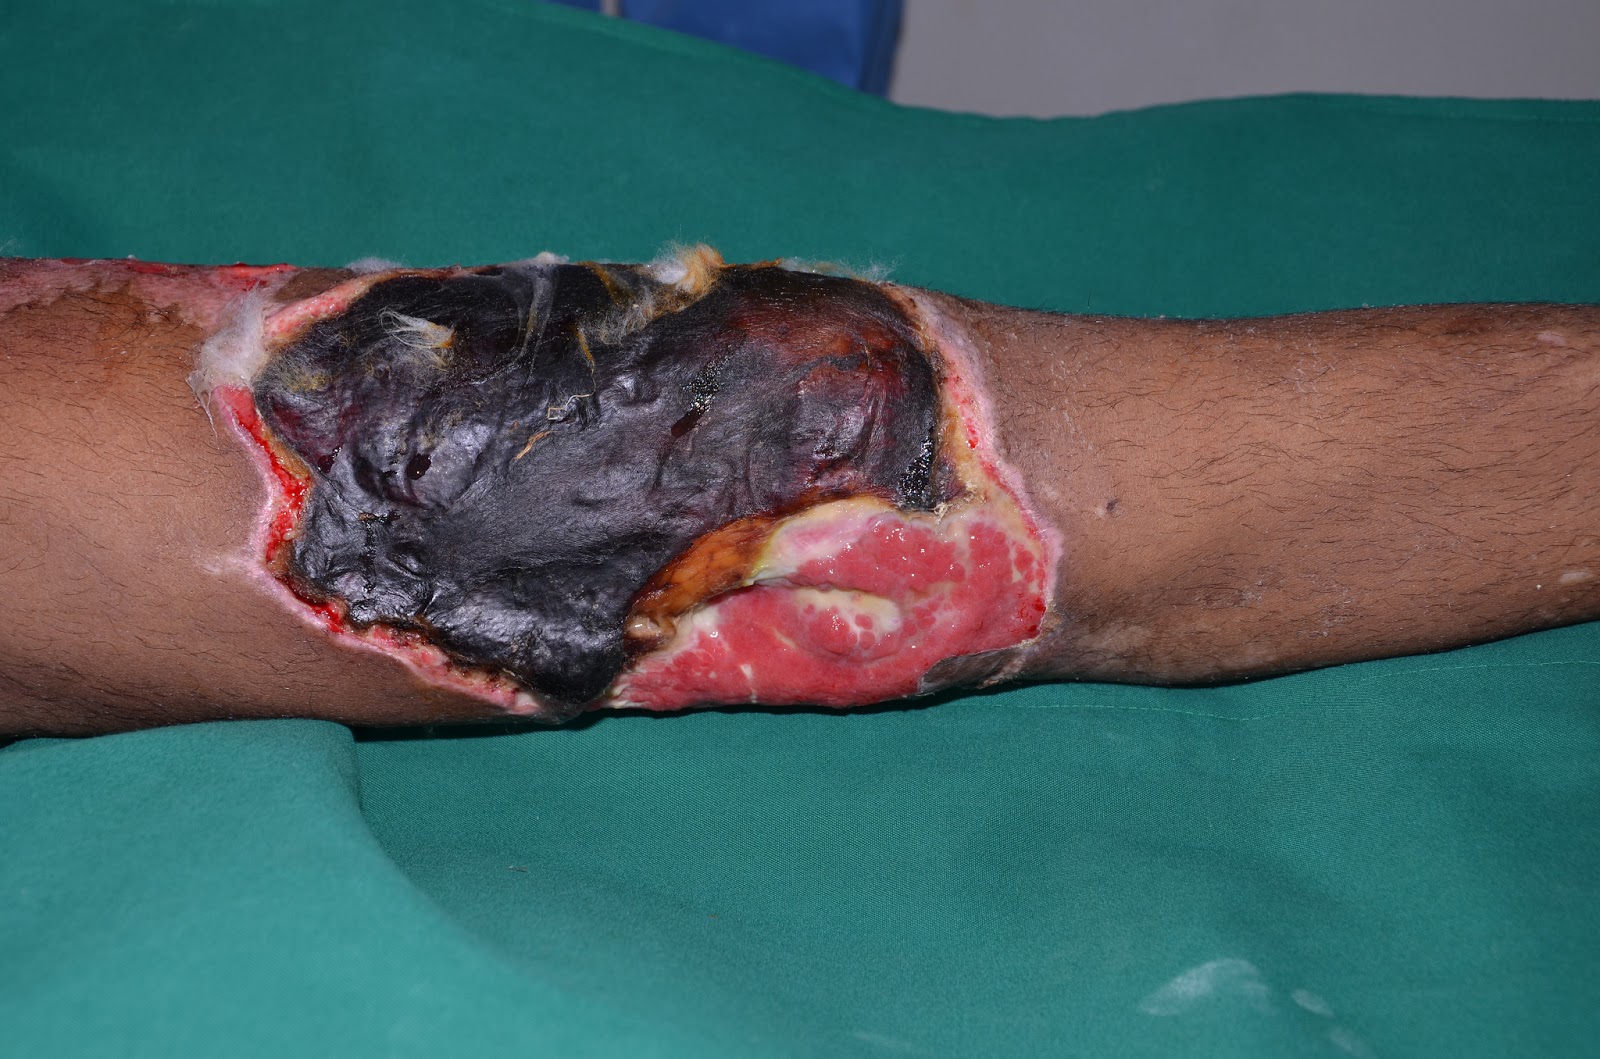 CRUSH INJURY FOOT, LOWER LIMB INJURIES AND LIMB SALVAGE: DEGLOVING INJURY  LEFT LEG AND KNEE - ROLE OF NEGATIVE PRESSURE WOUND THERAPY